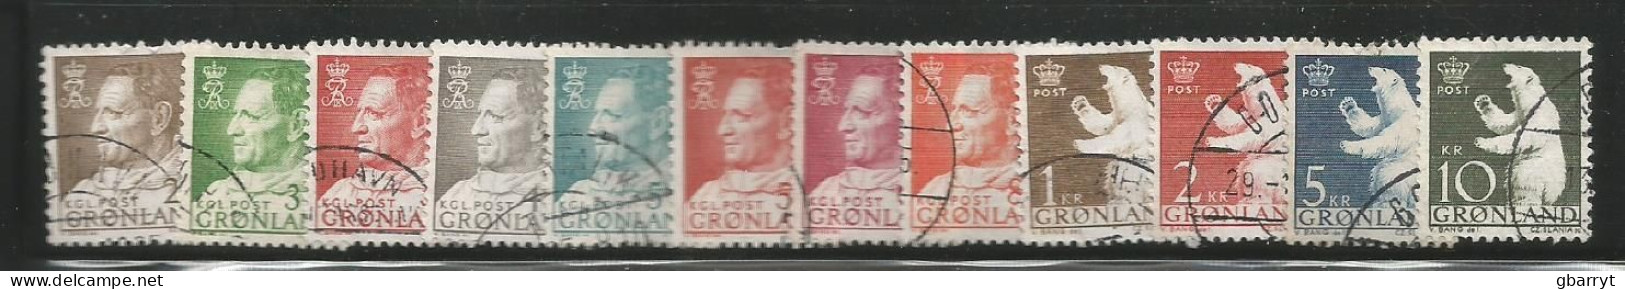 Greenland Scott # 48 - 65 Used VF.complete.......................................w64 - Oblitérés